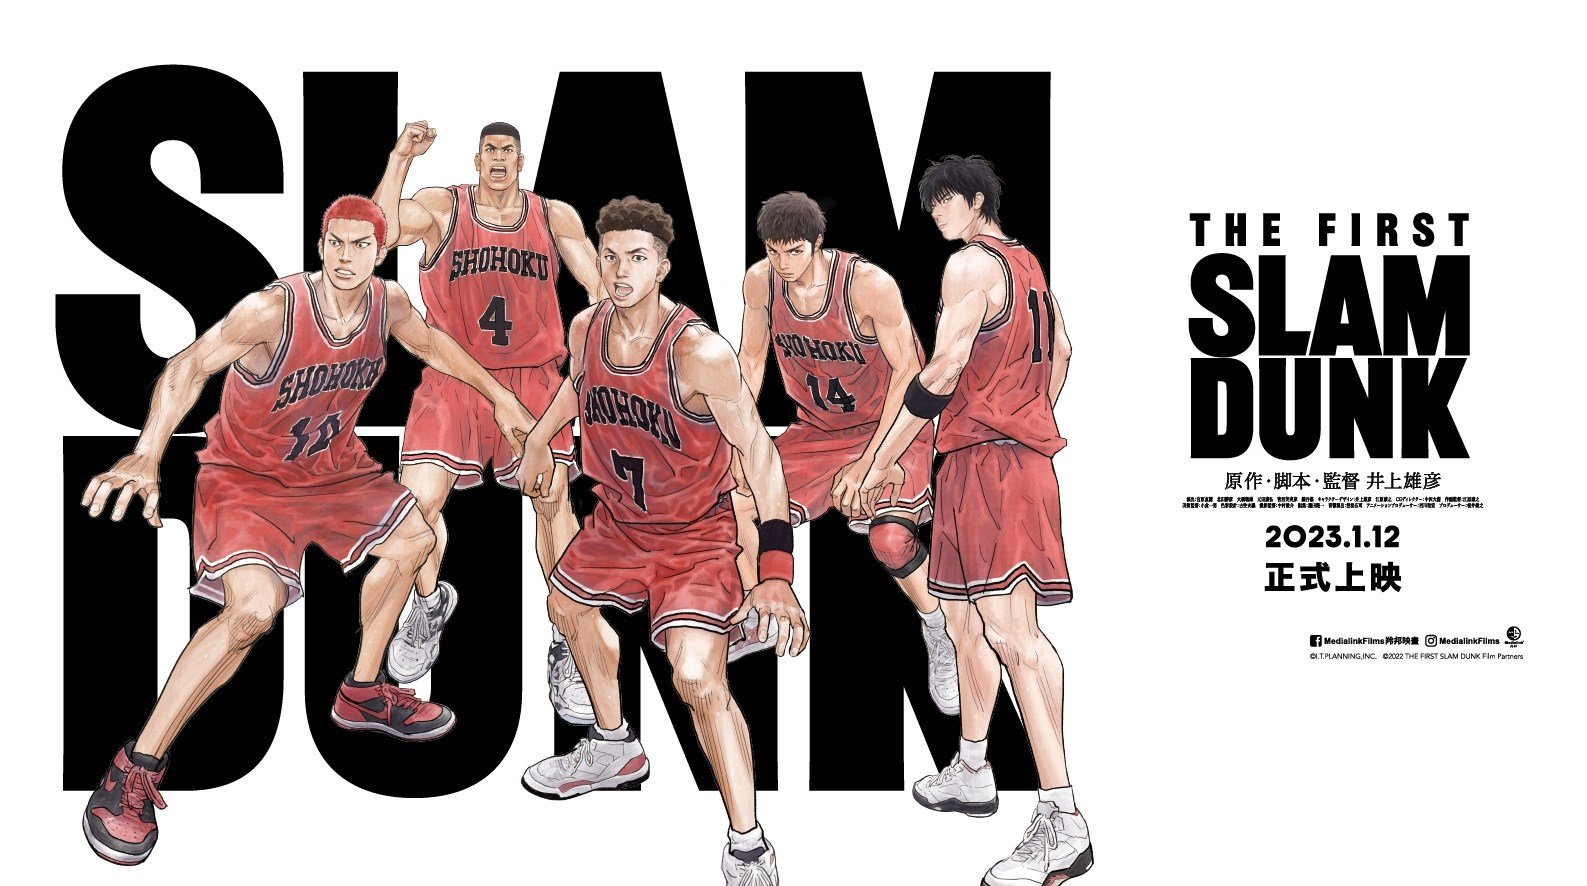 The First Slam Dunk' review: A heartfelt adaptation of a beloved manga series about life and basketball. South China Morning Post